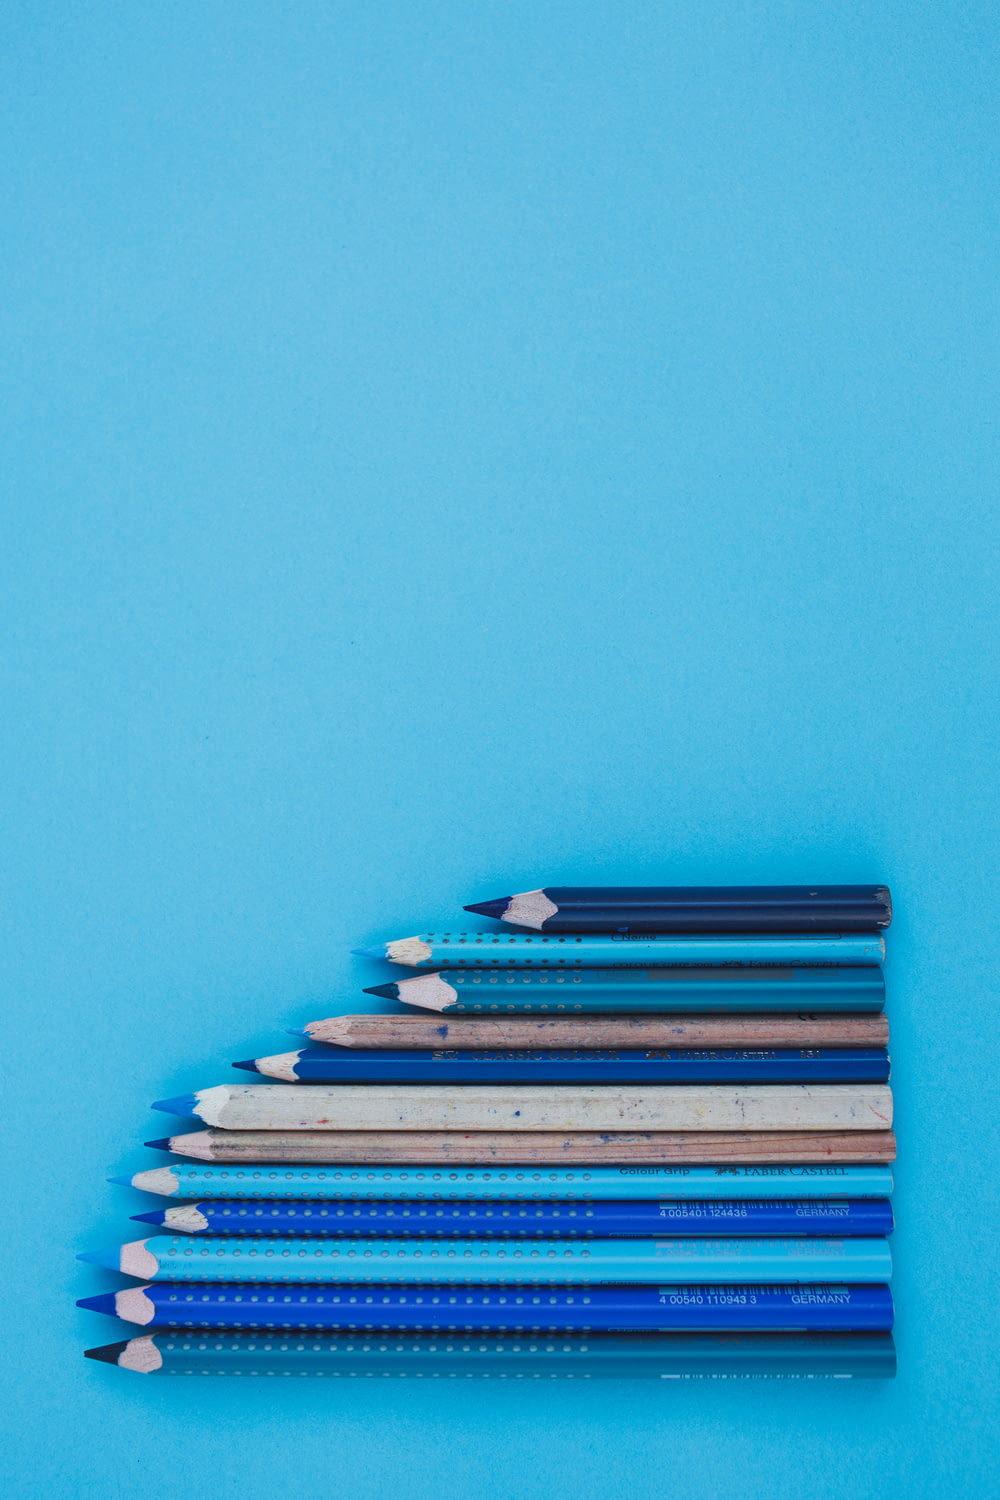 blue and white coloring pencils